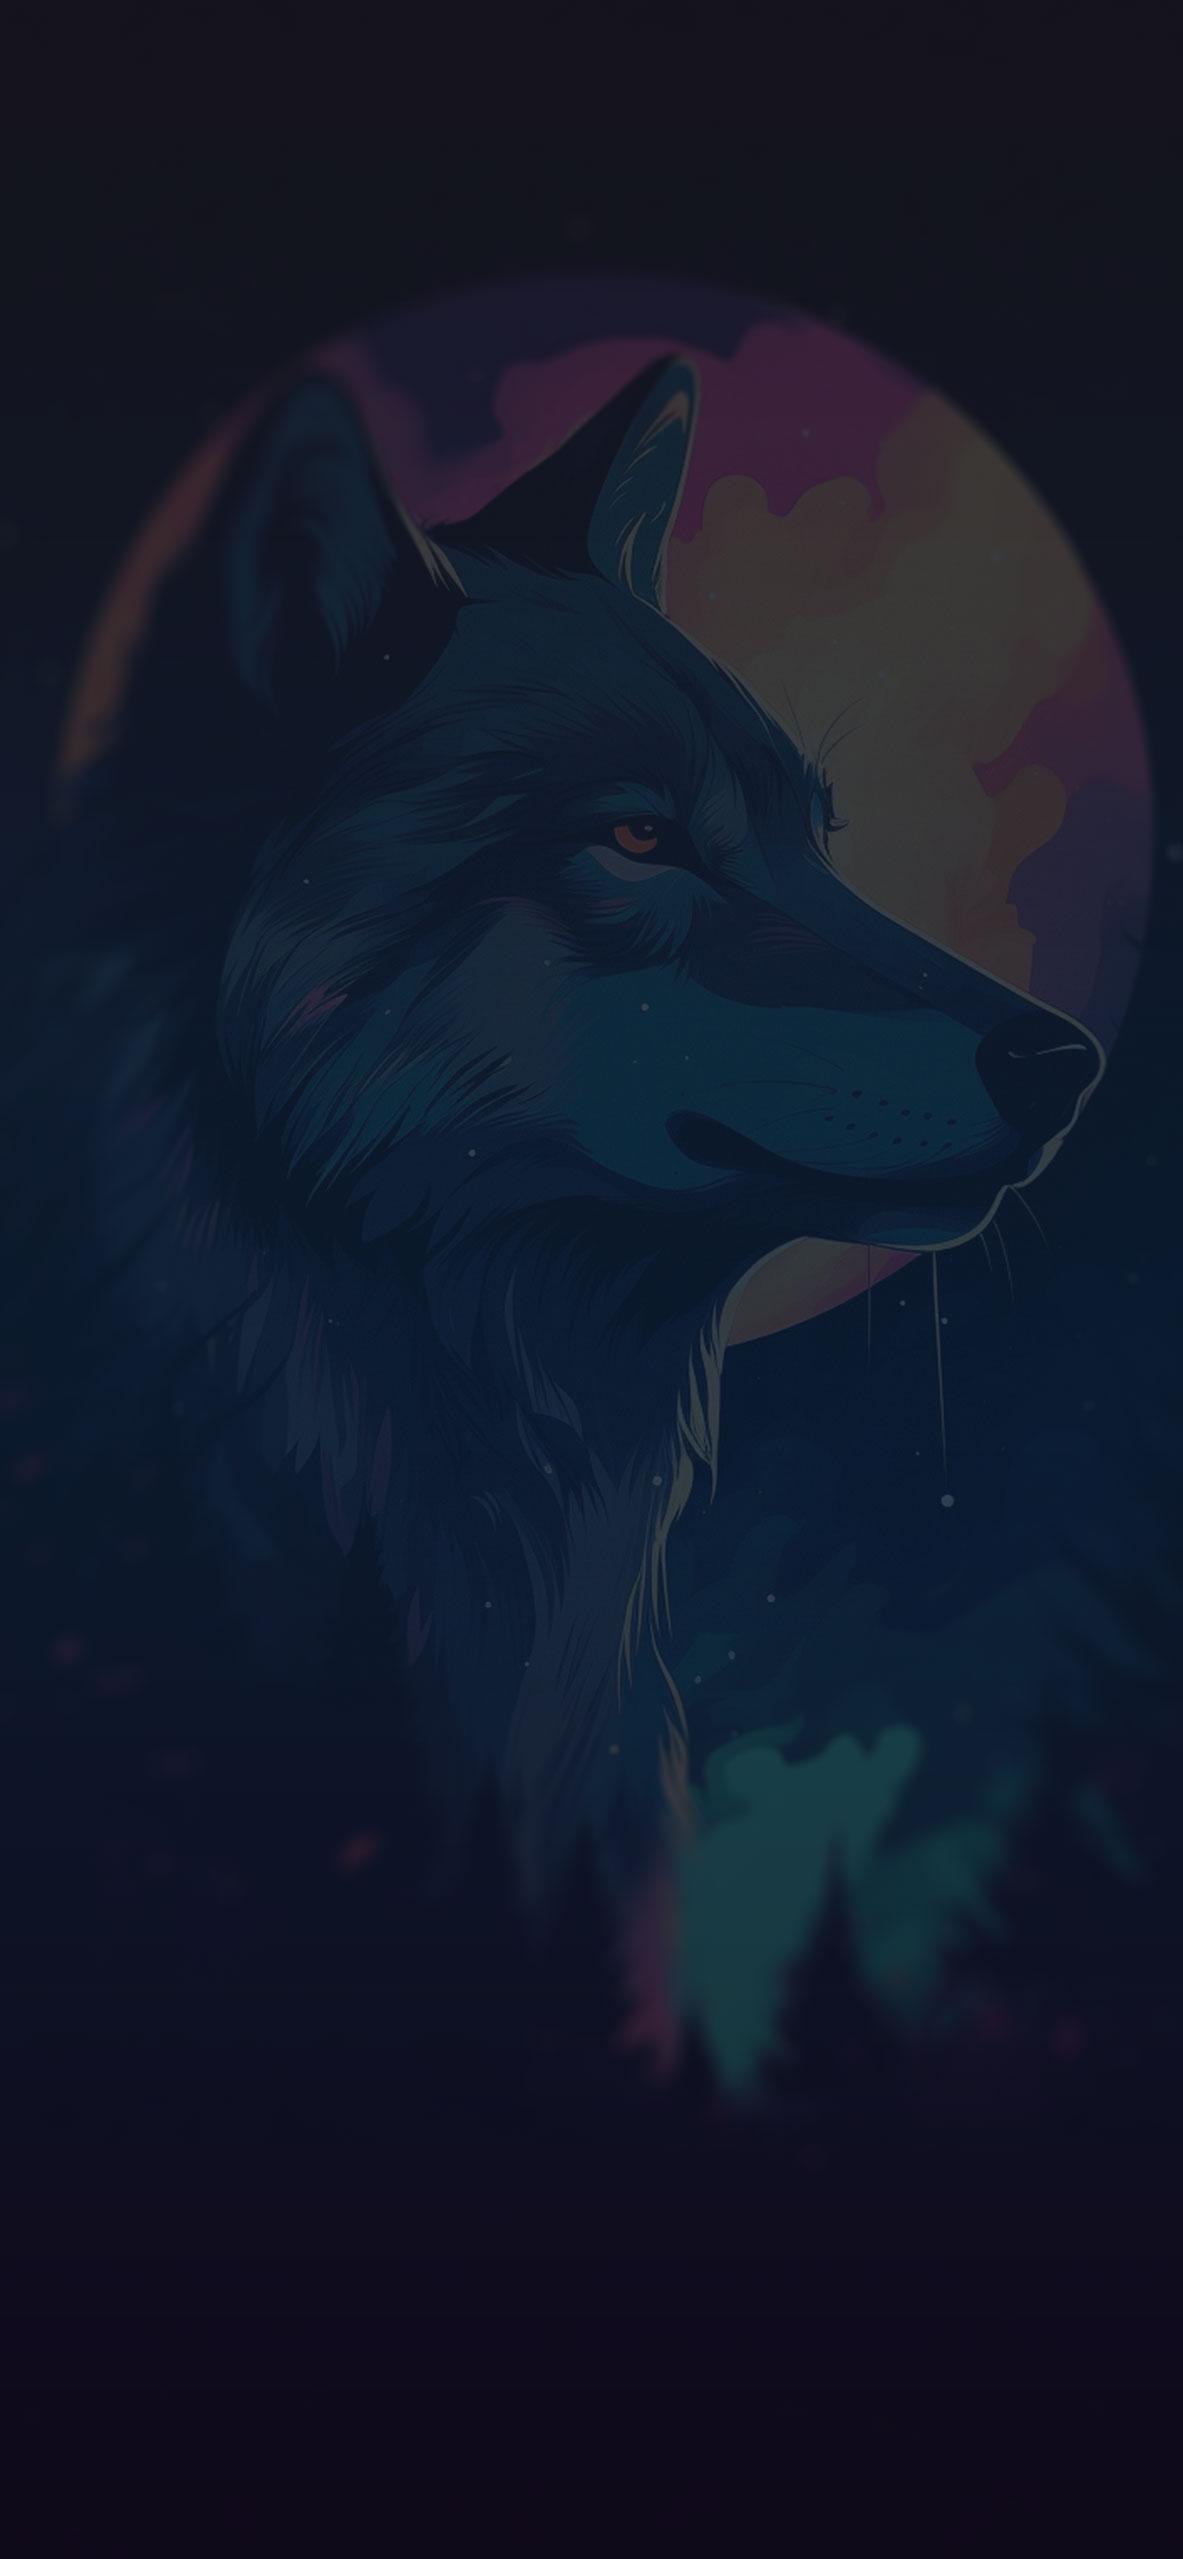 Wolf Moon Art Wallpaper Cool For iPhone 4k